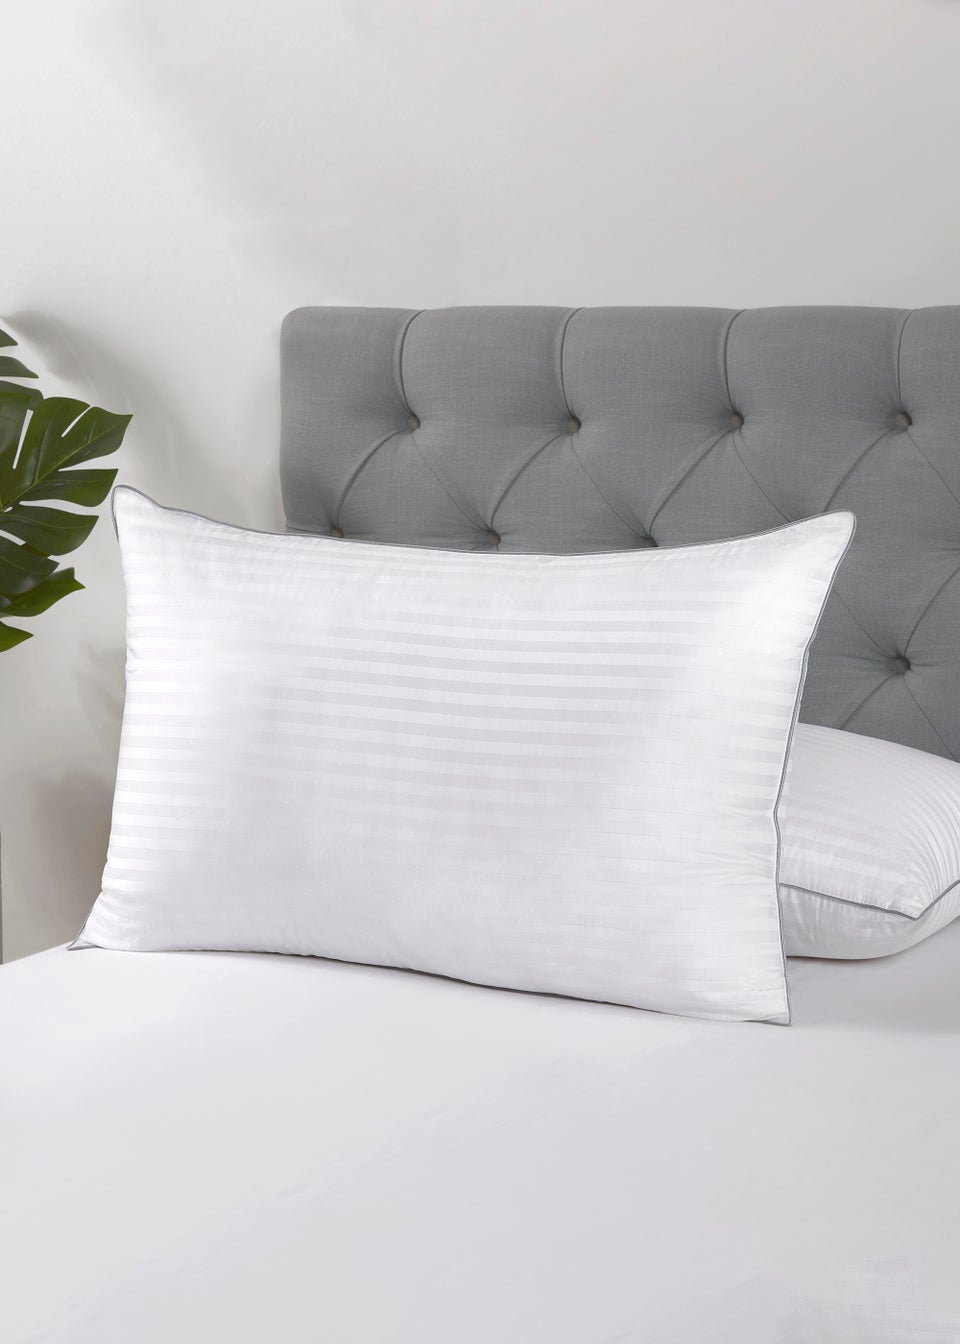 Bhs White Goose Down Pillow (Soft to Medium Support)